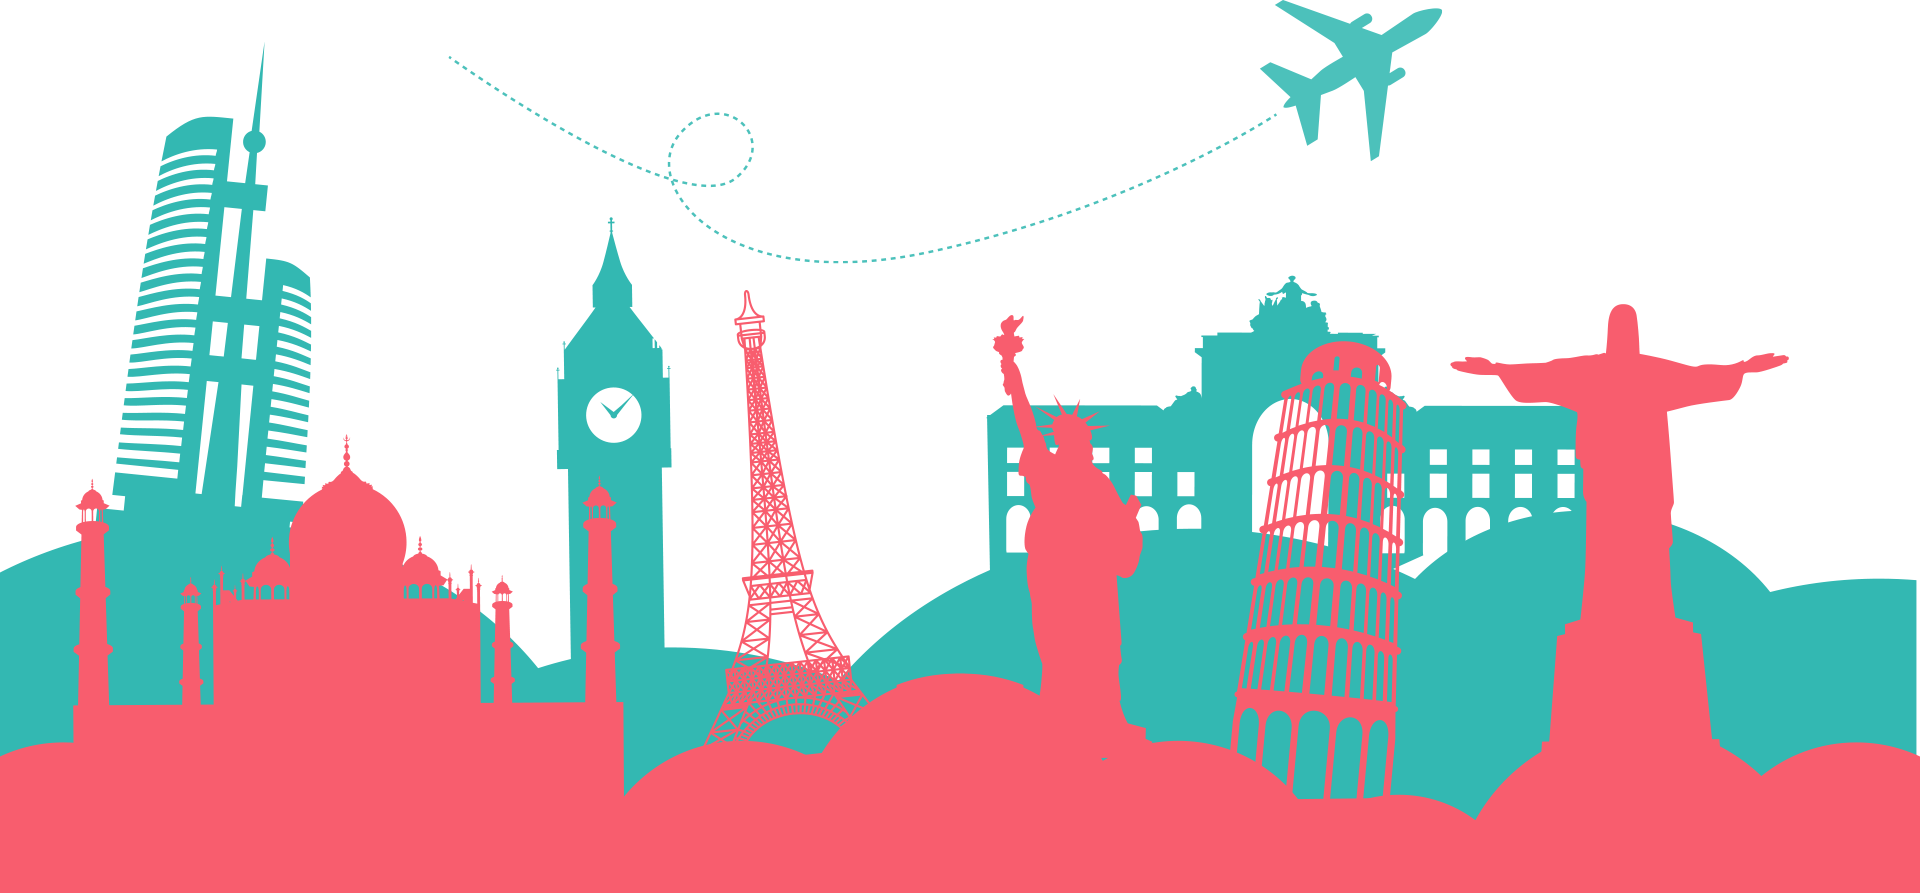 A Silhouette Of A City With A Plane Flying In The Sky